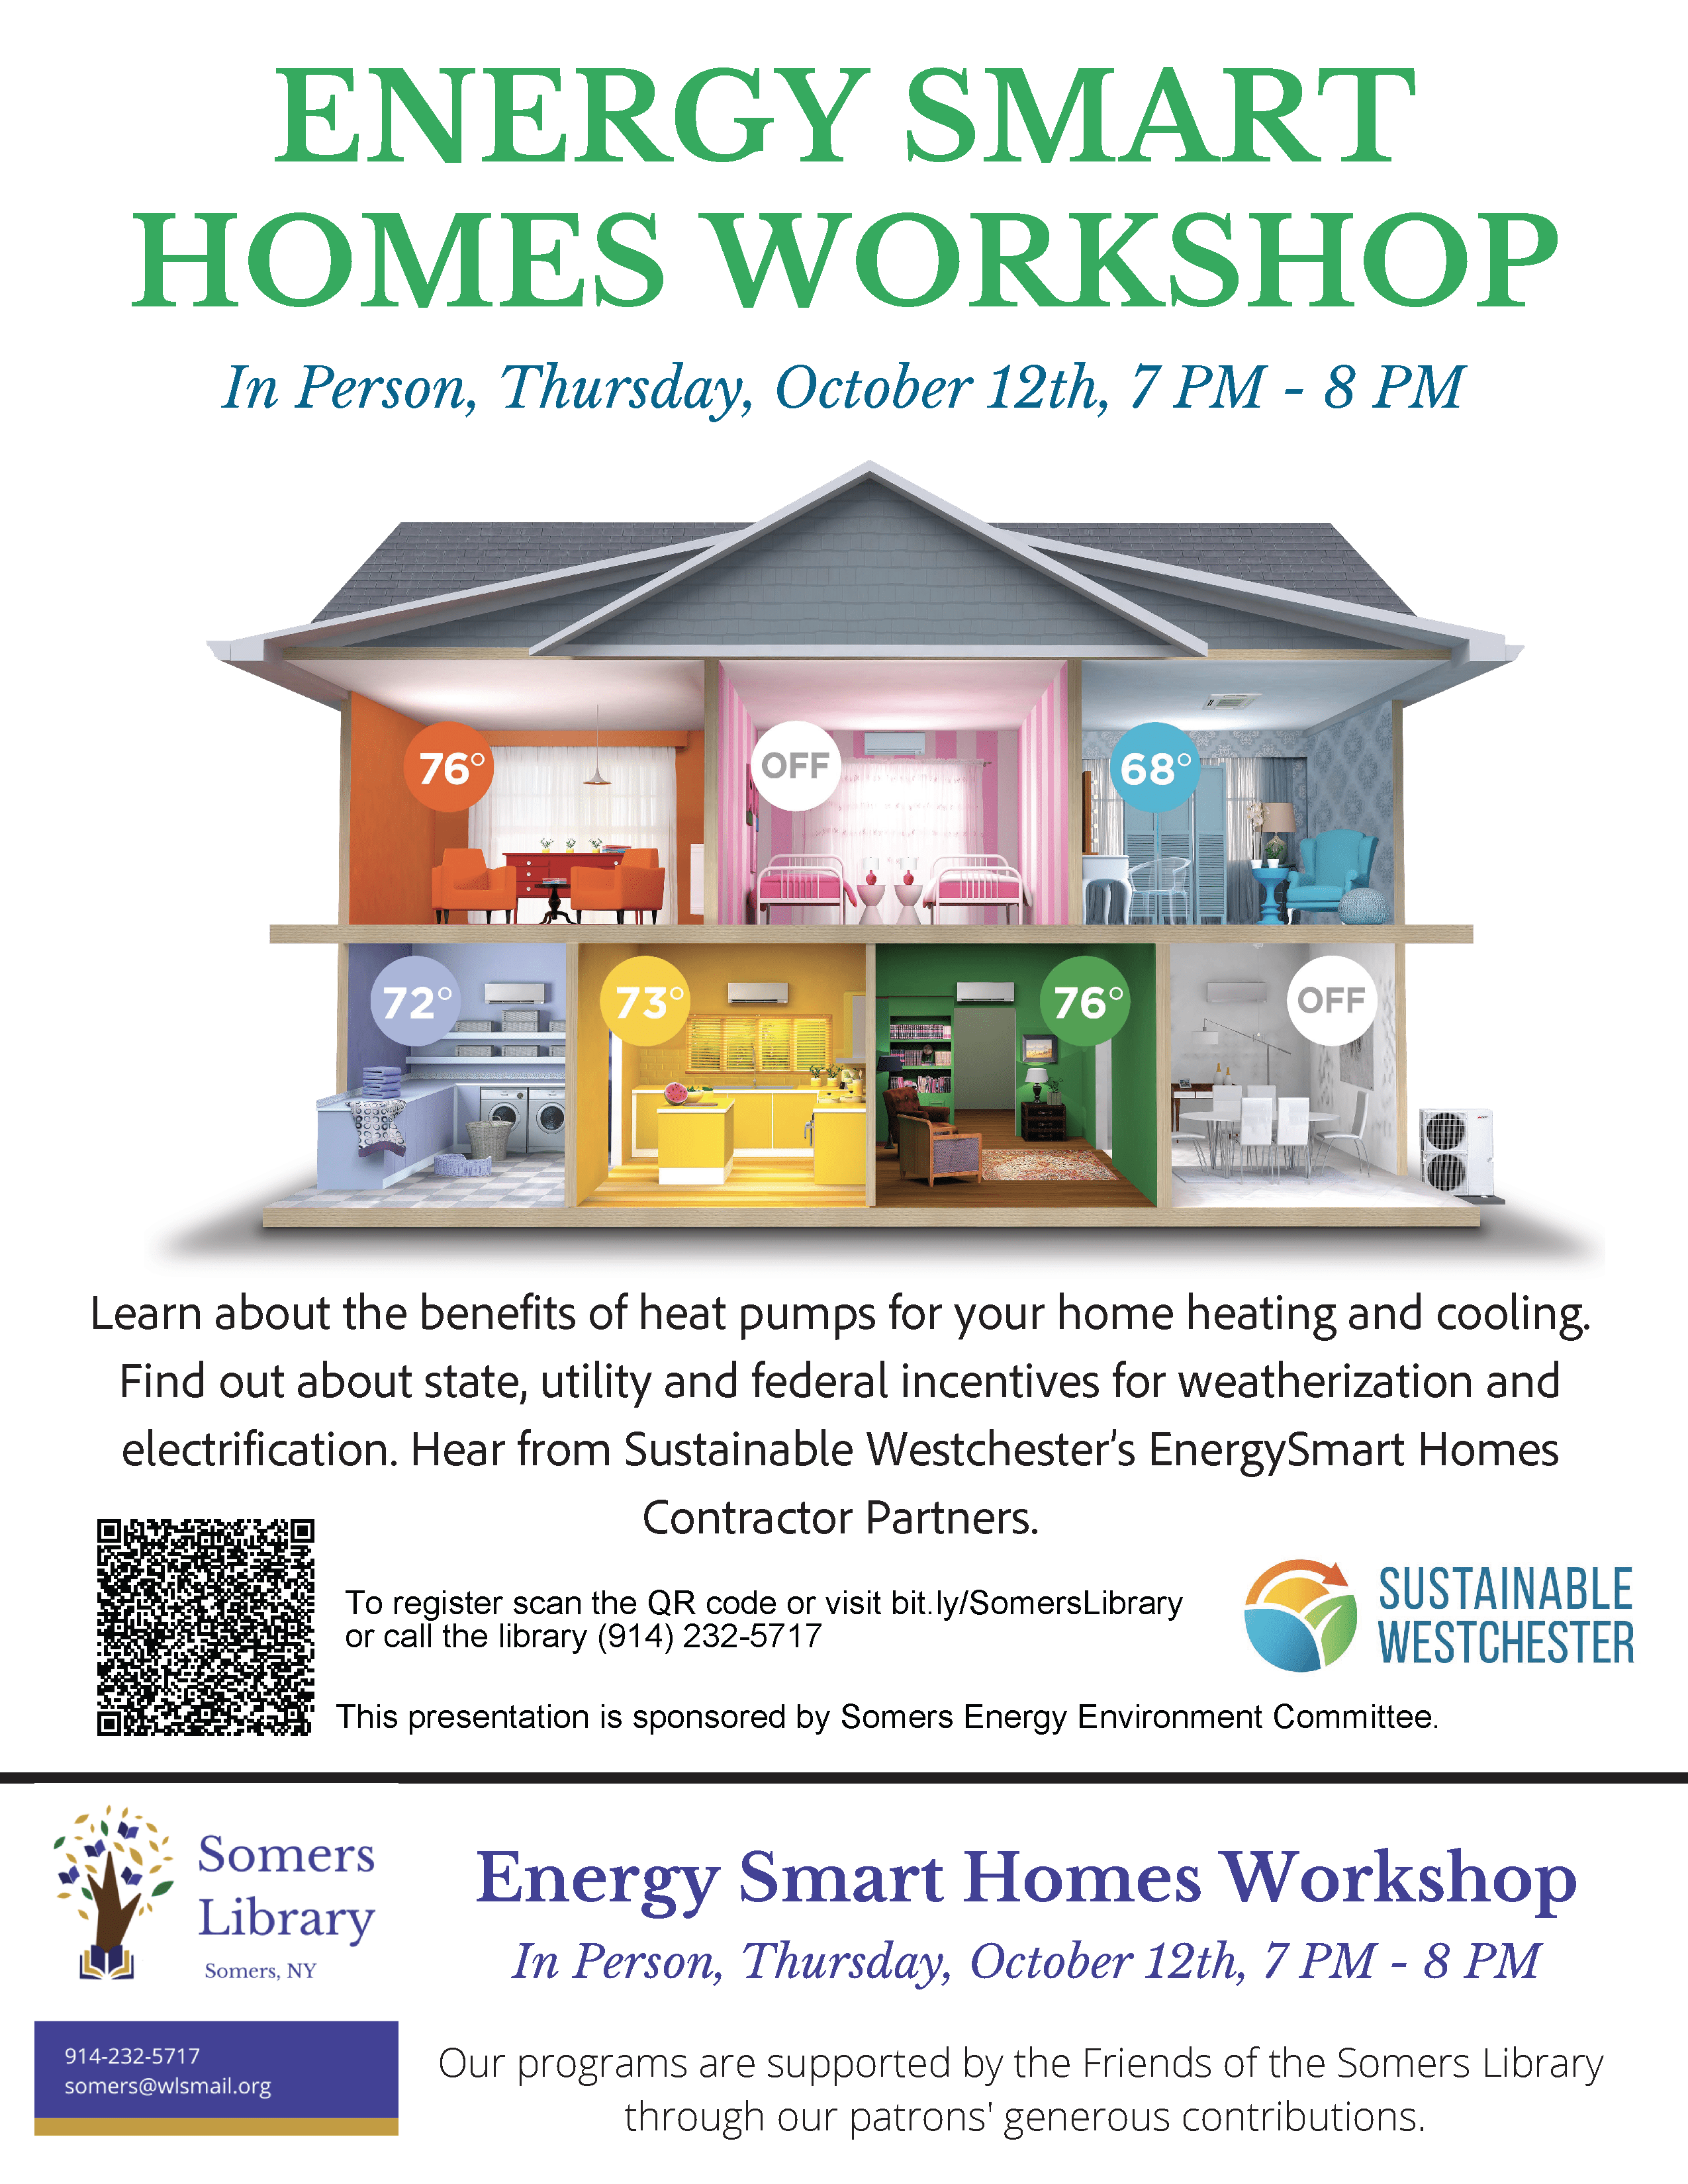 EnergySmart Homes Workshop at the Somers Library